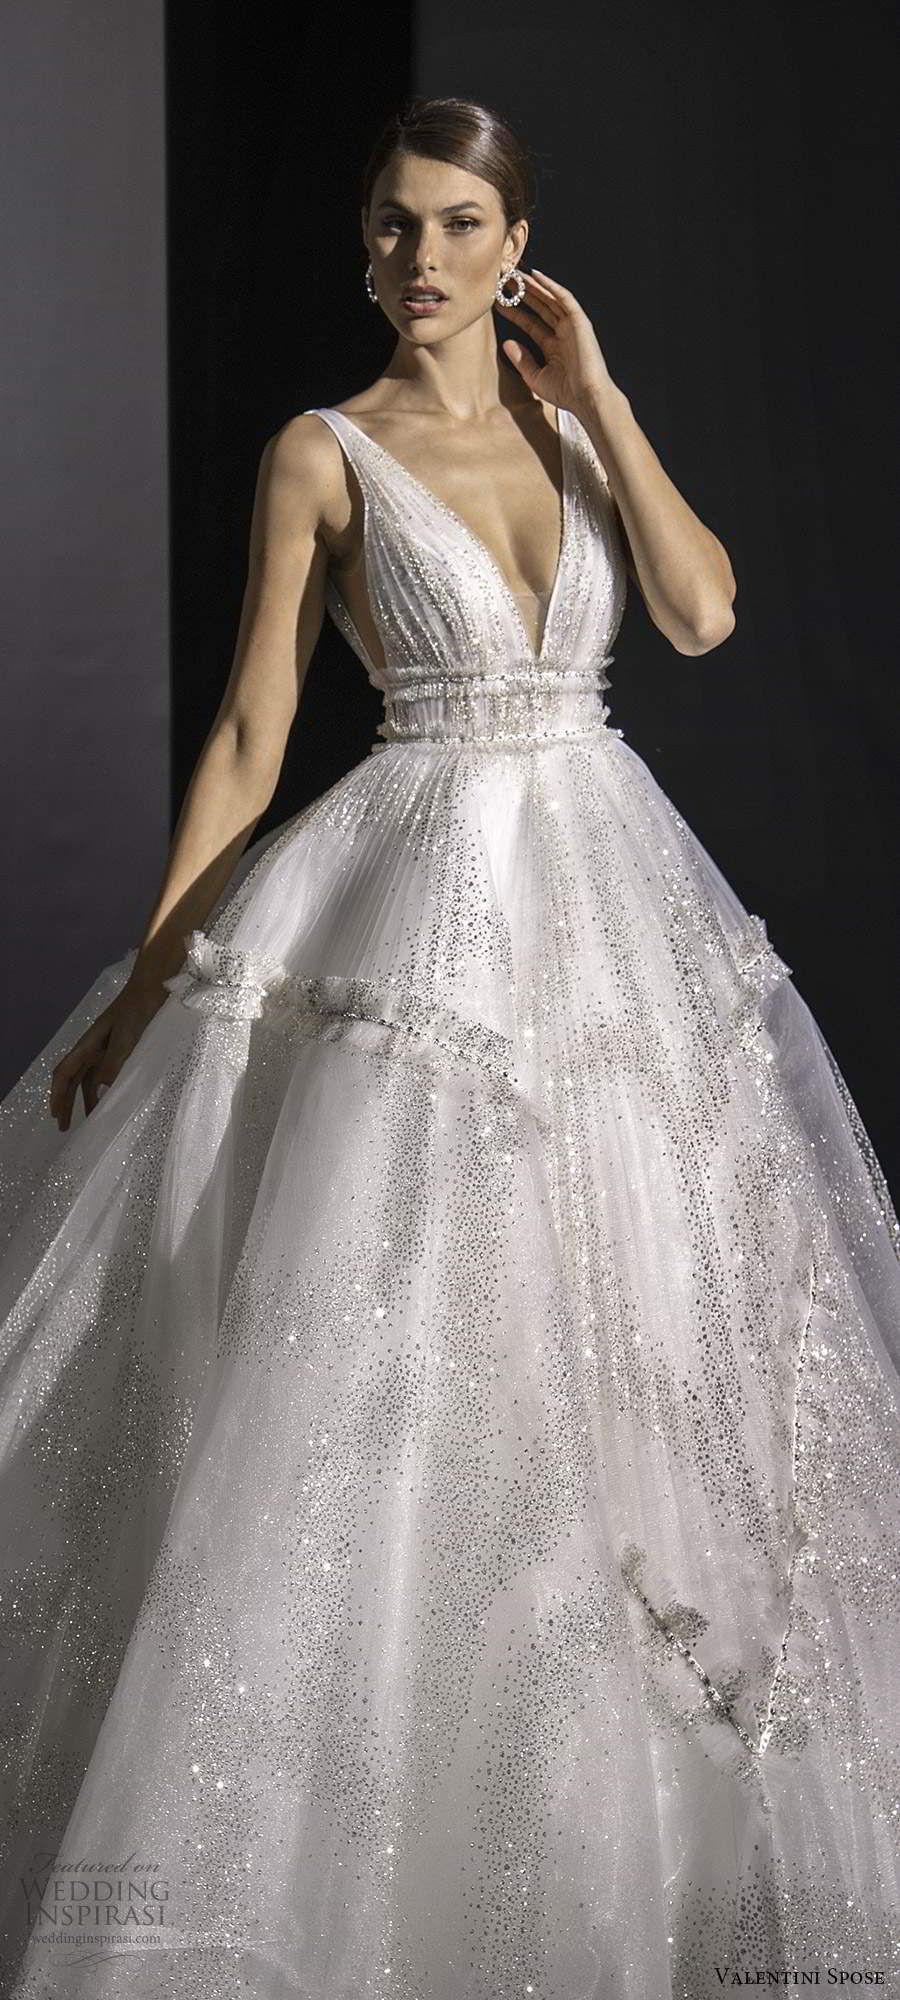 valentini spose fall 2020 bridal sleeveless straps plunging v neckline ruched bodice fully embellished glitzy a line ball gown wedding dress v back chapel train (8) lv